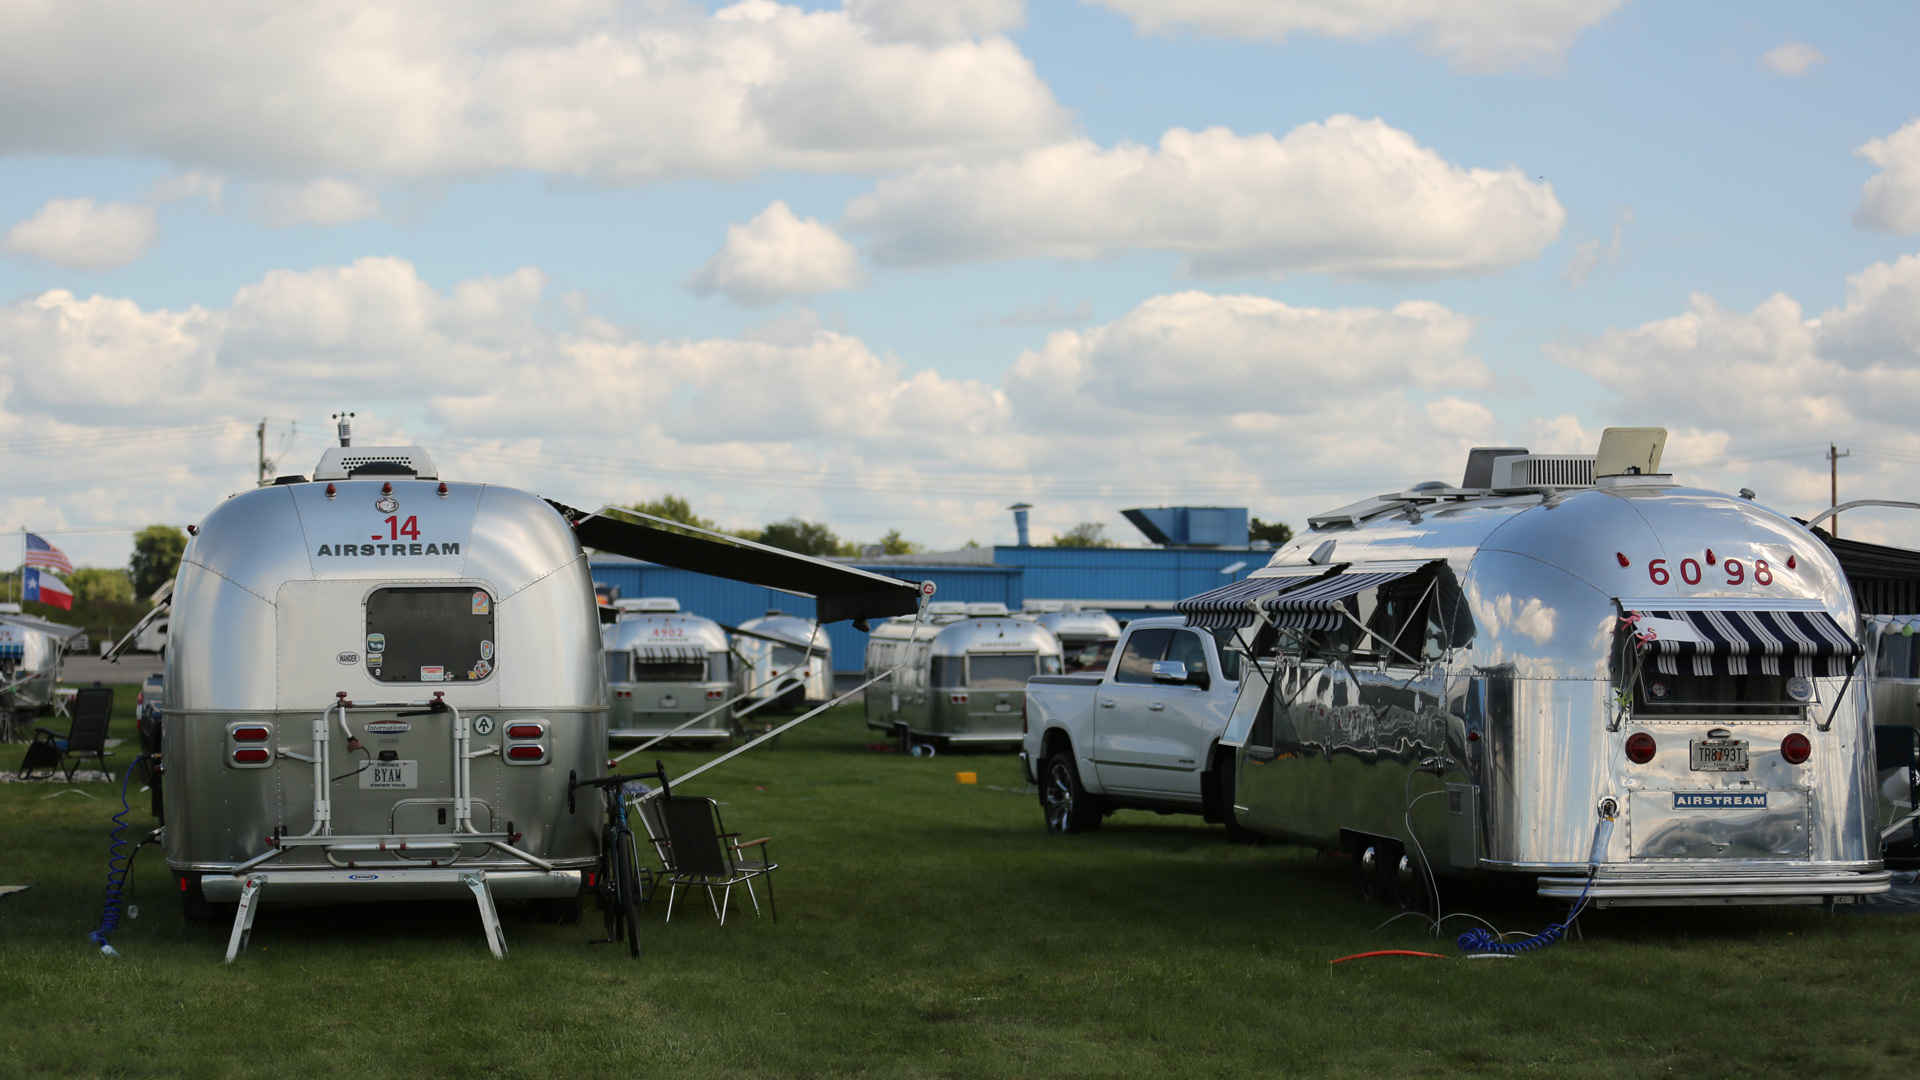 Airstream Travel Trailers parked at Airstream Headquarters in Jackson Center, Ohio during Alumapalooza